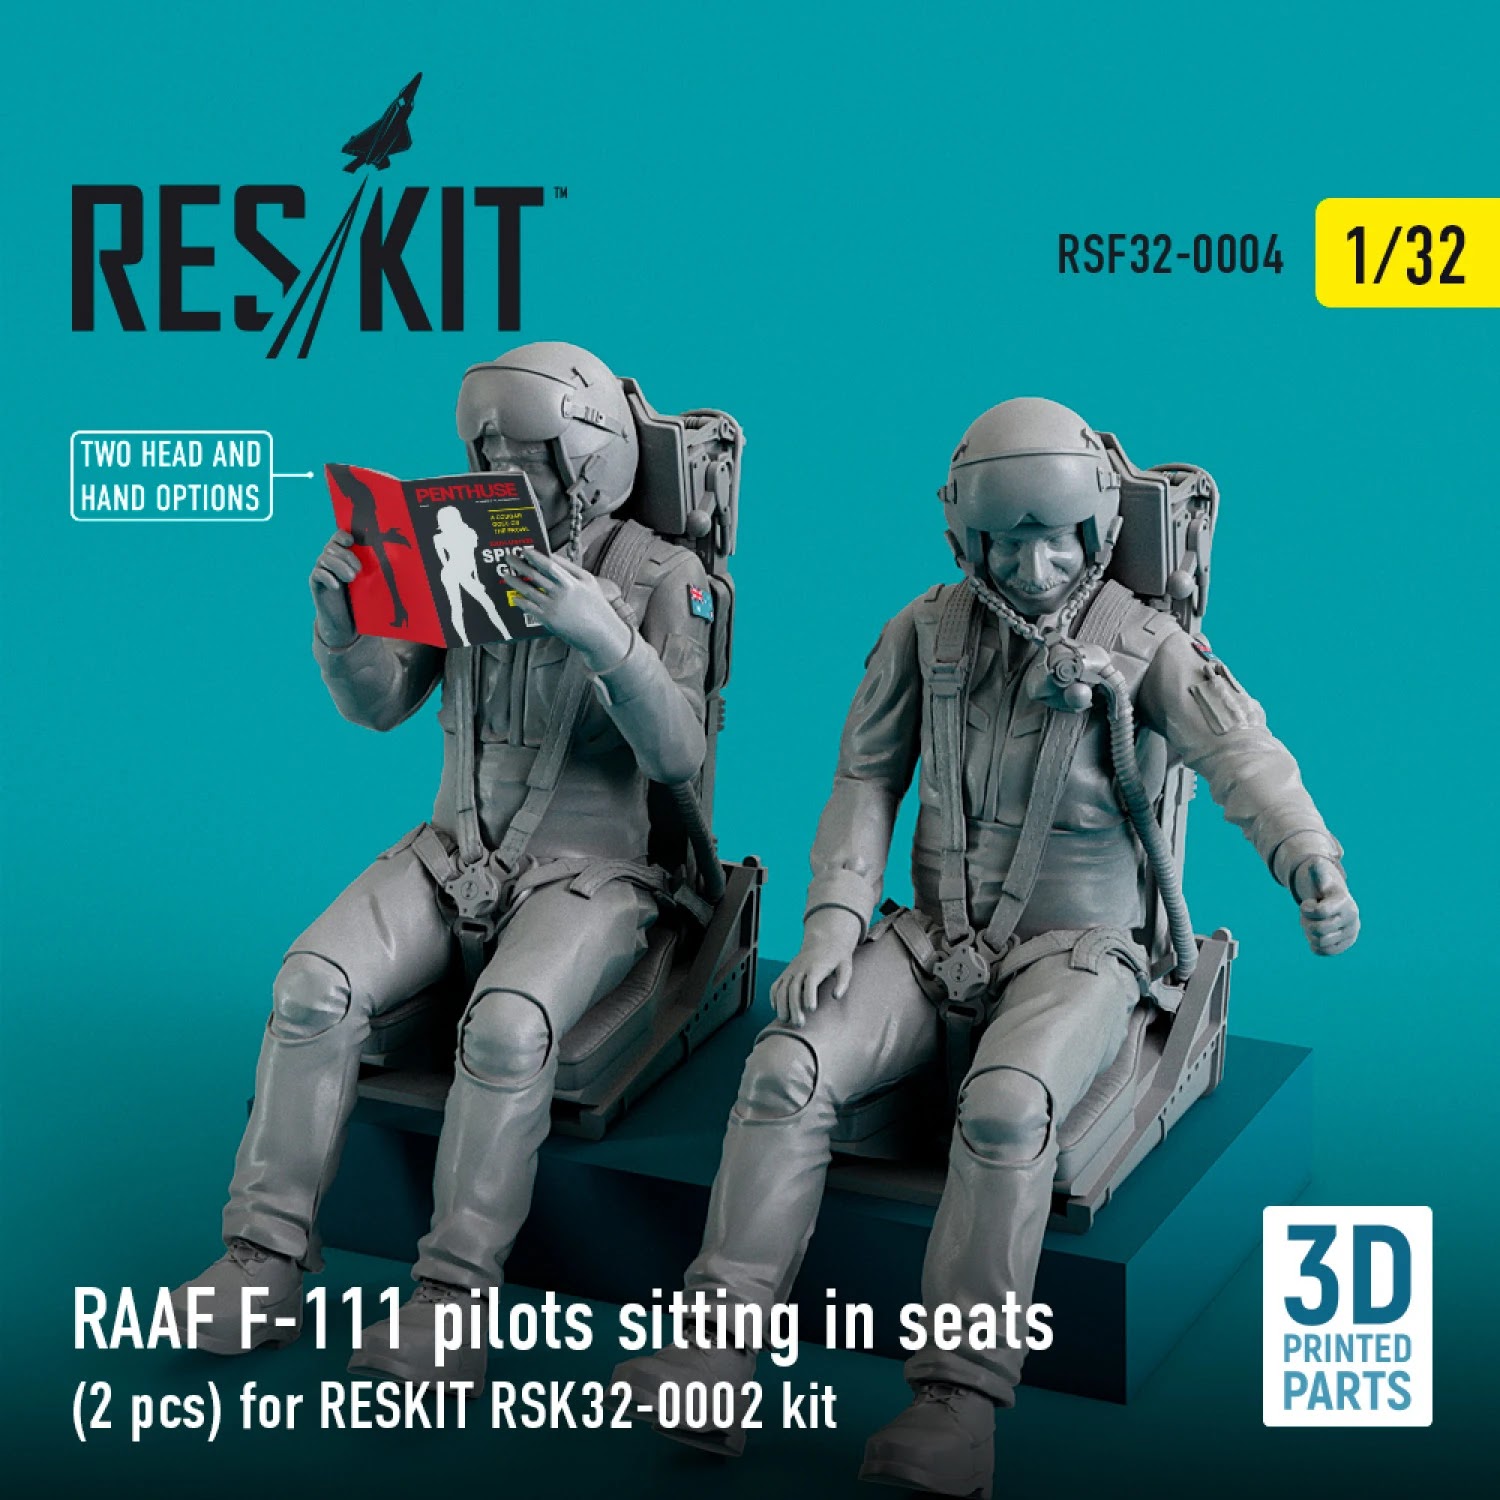 The Modelling News: Review: ResKit 1/32nd scale RAAF F-111C Escape